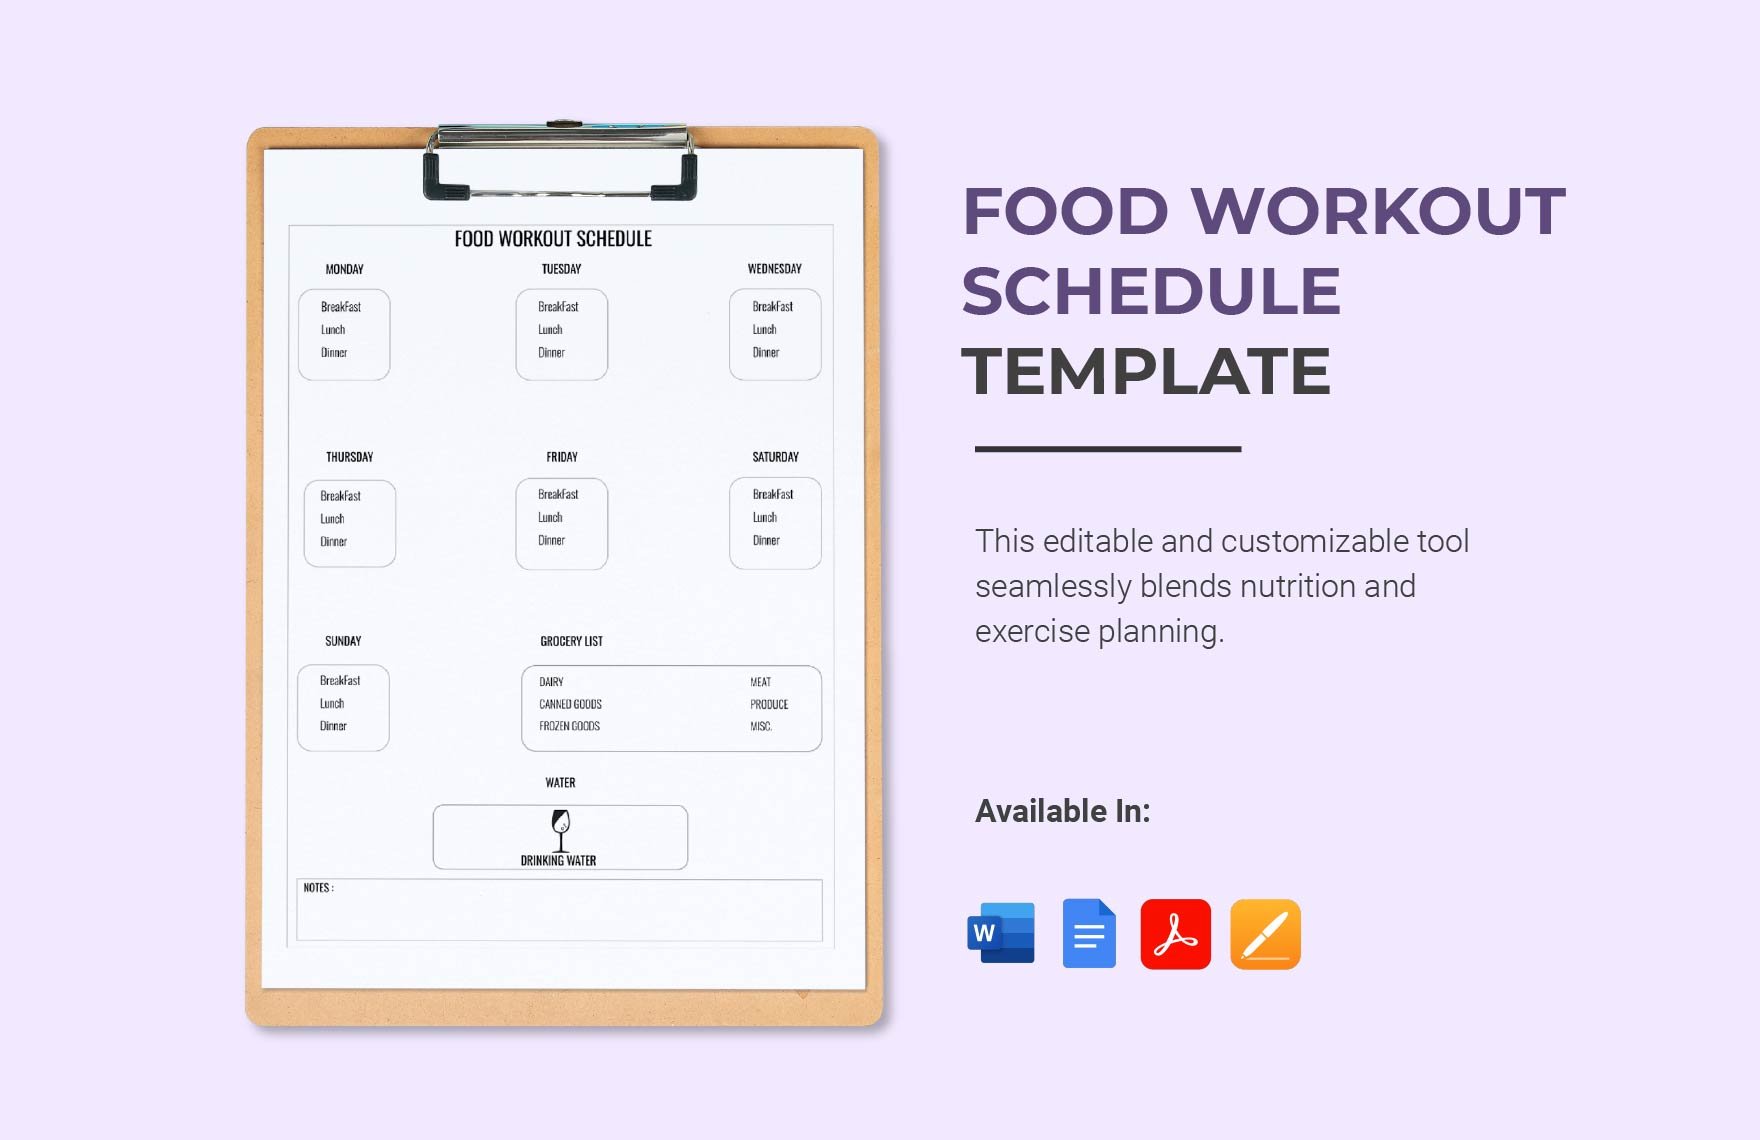 Food Workout Schedule Template